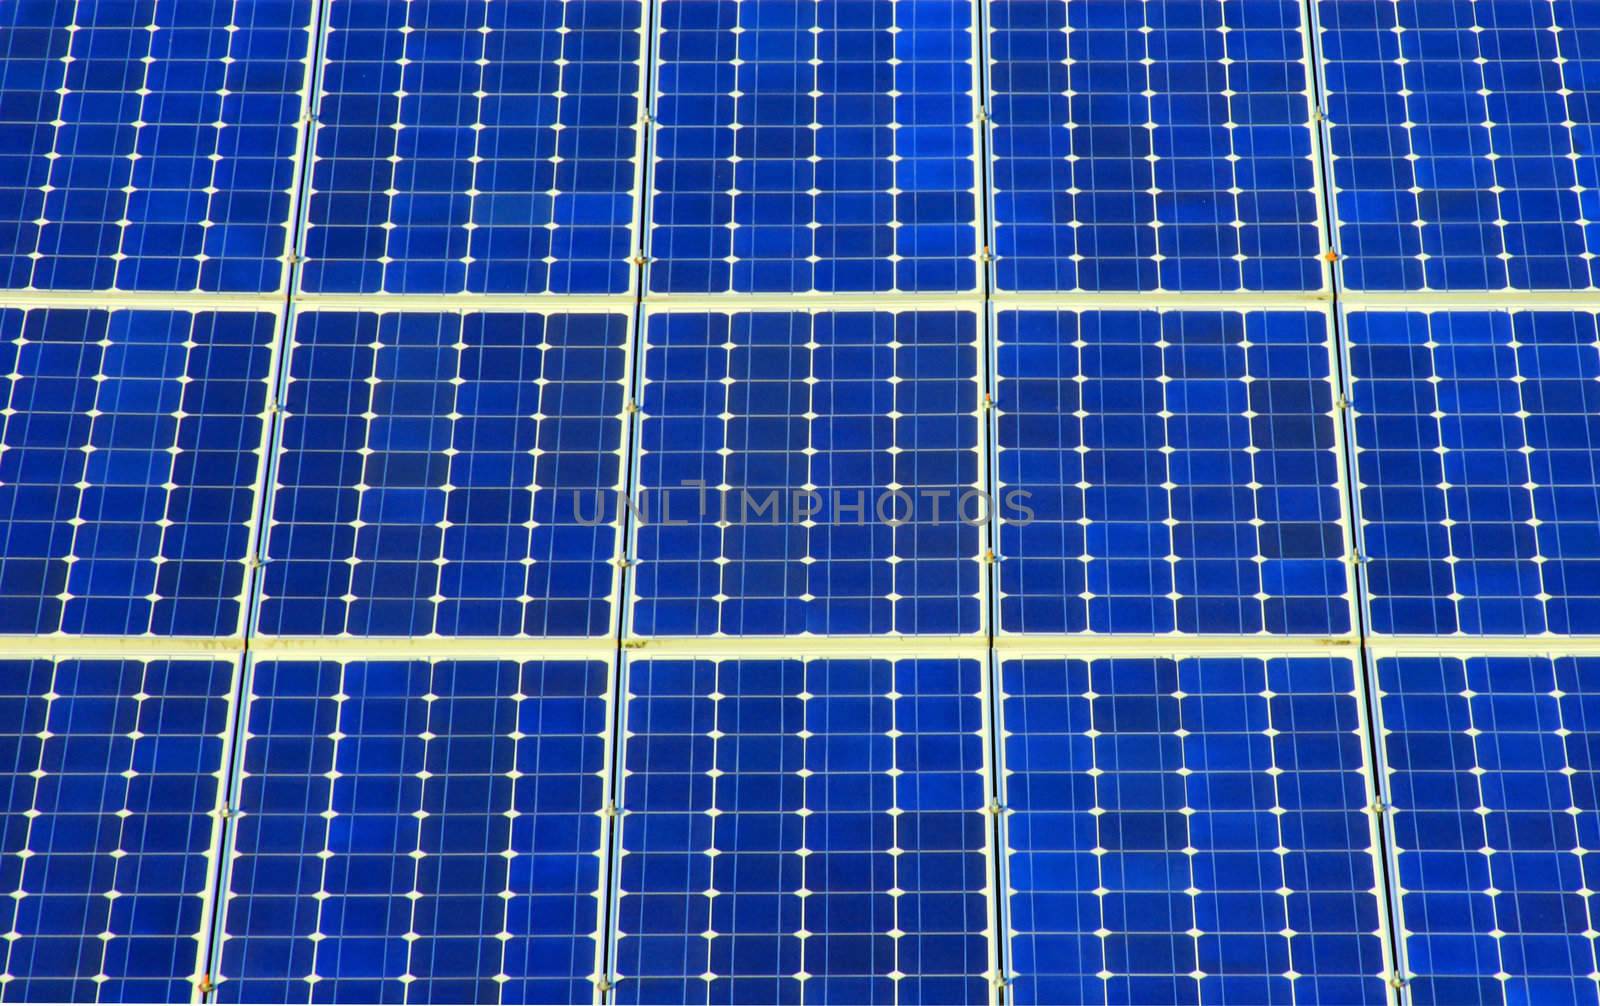 This image shows blue shifted solar cells